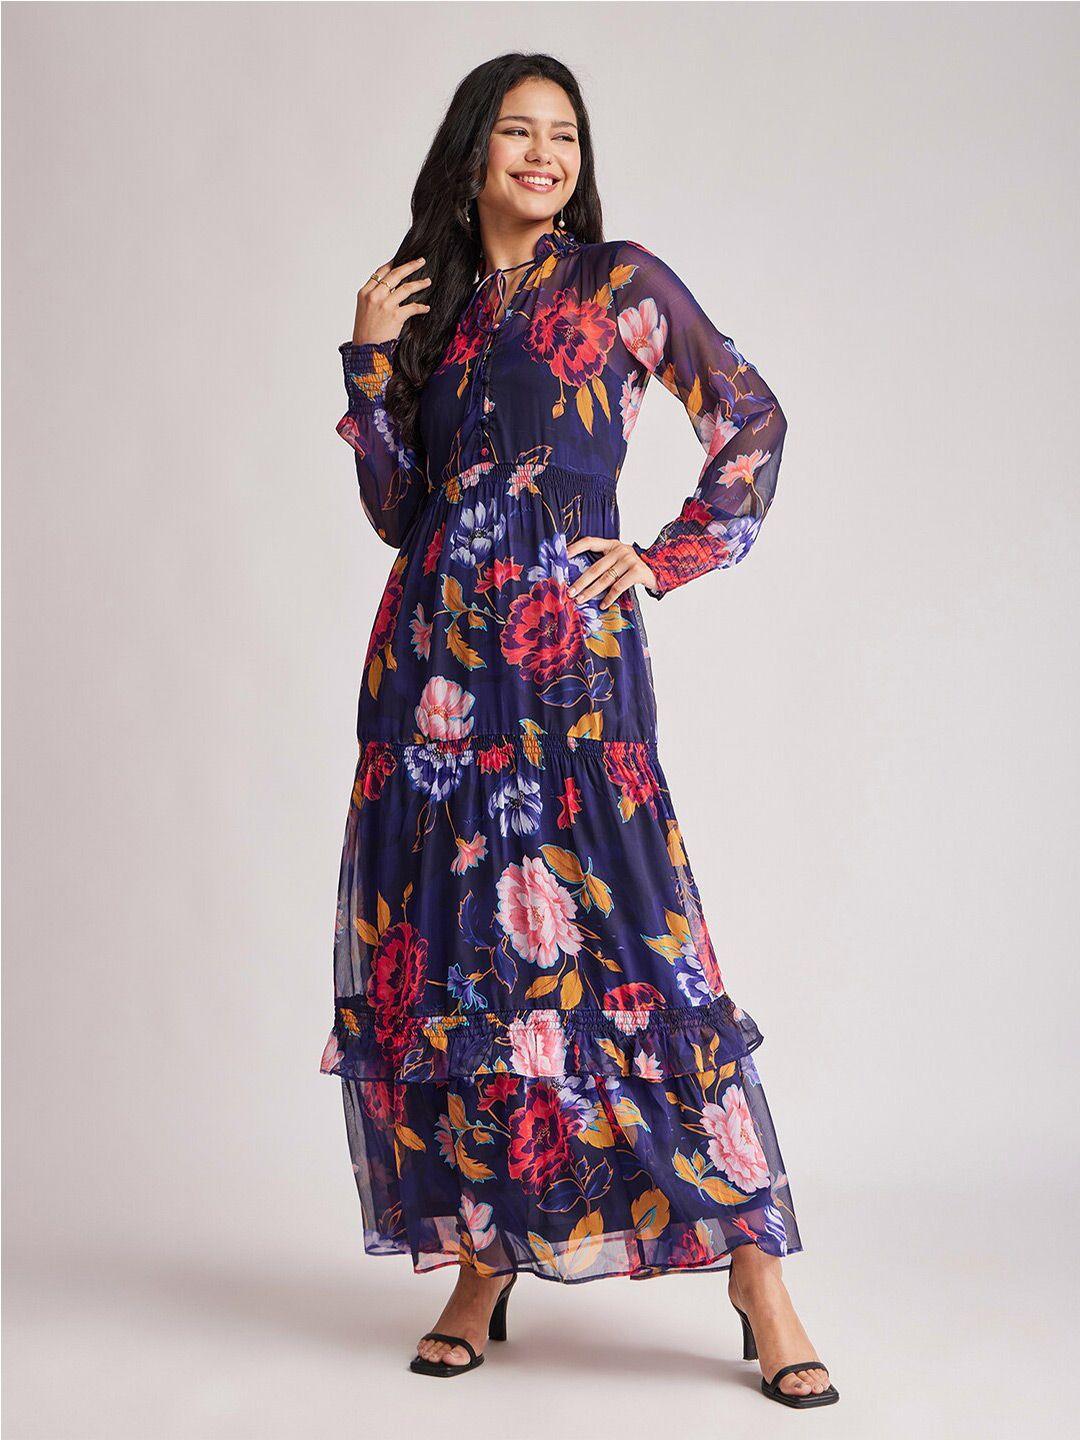 fablestreet floral printed tie-up neck smocked semi sheer tiered chiffon maxi dress